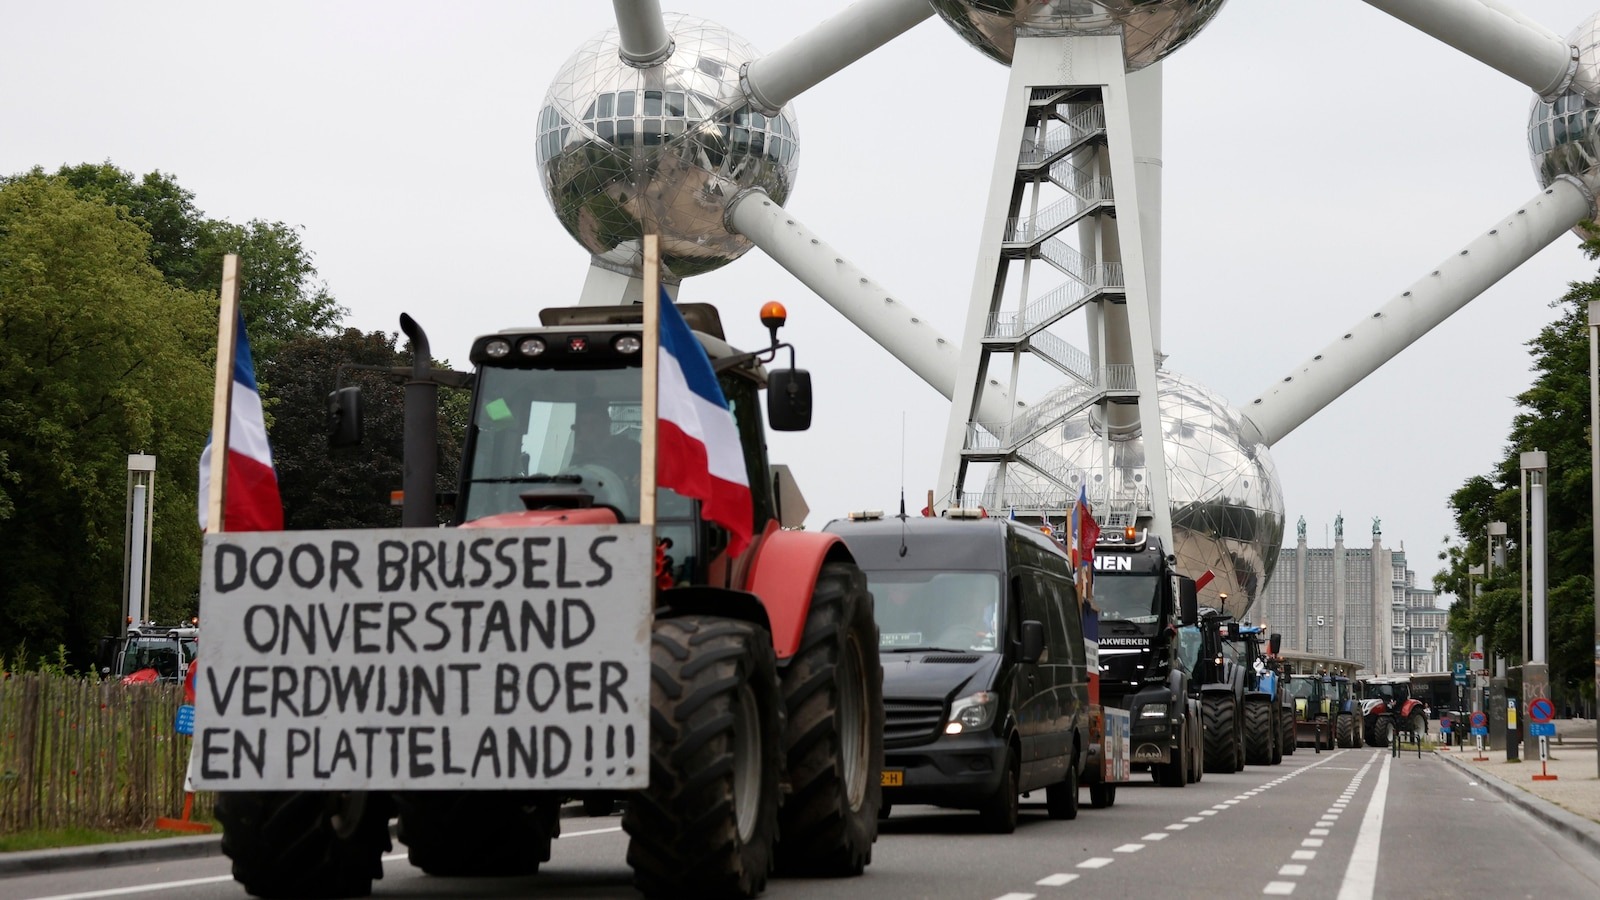 Tractors are once again thundering through the streets in the run-up to the EU elections.  Agriculture is a major problem and the extreme right is taking advantage